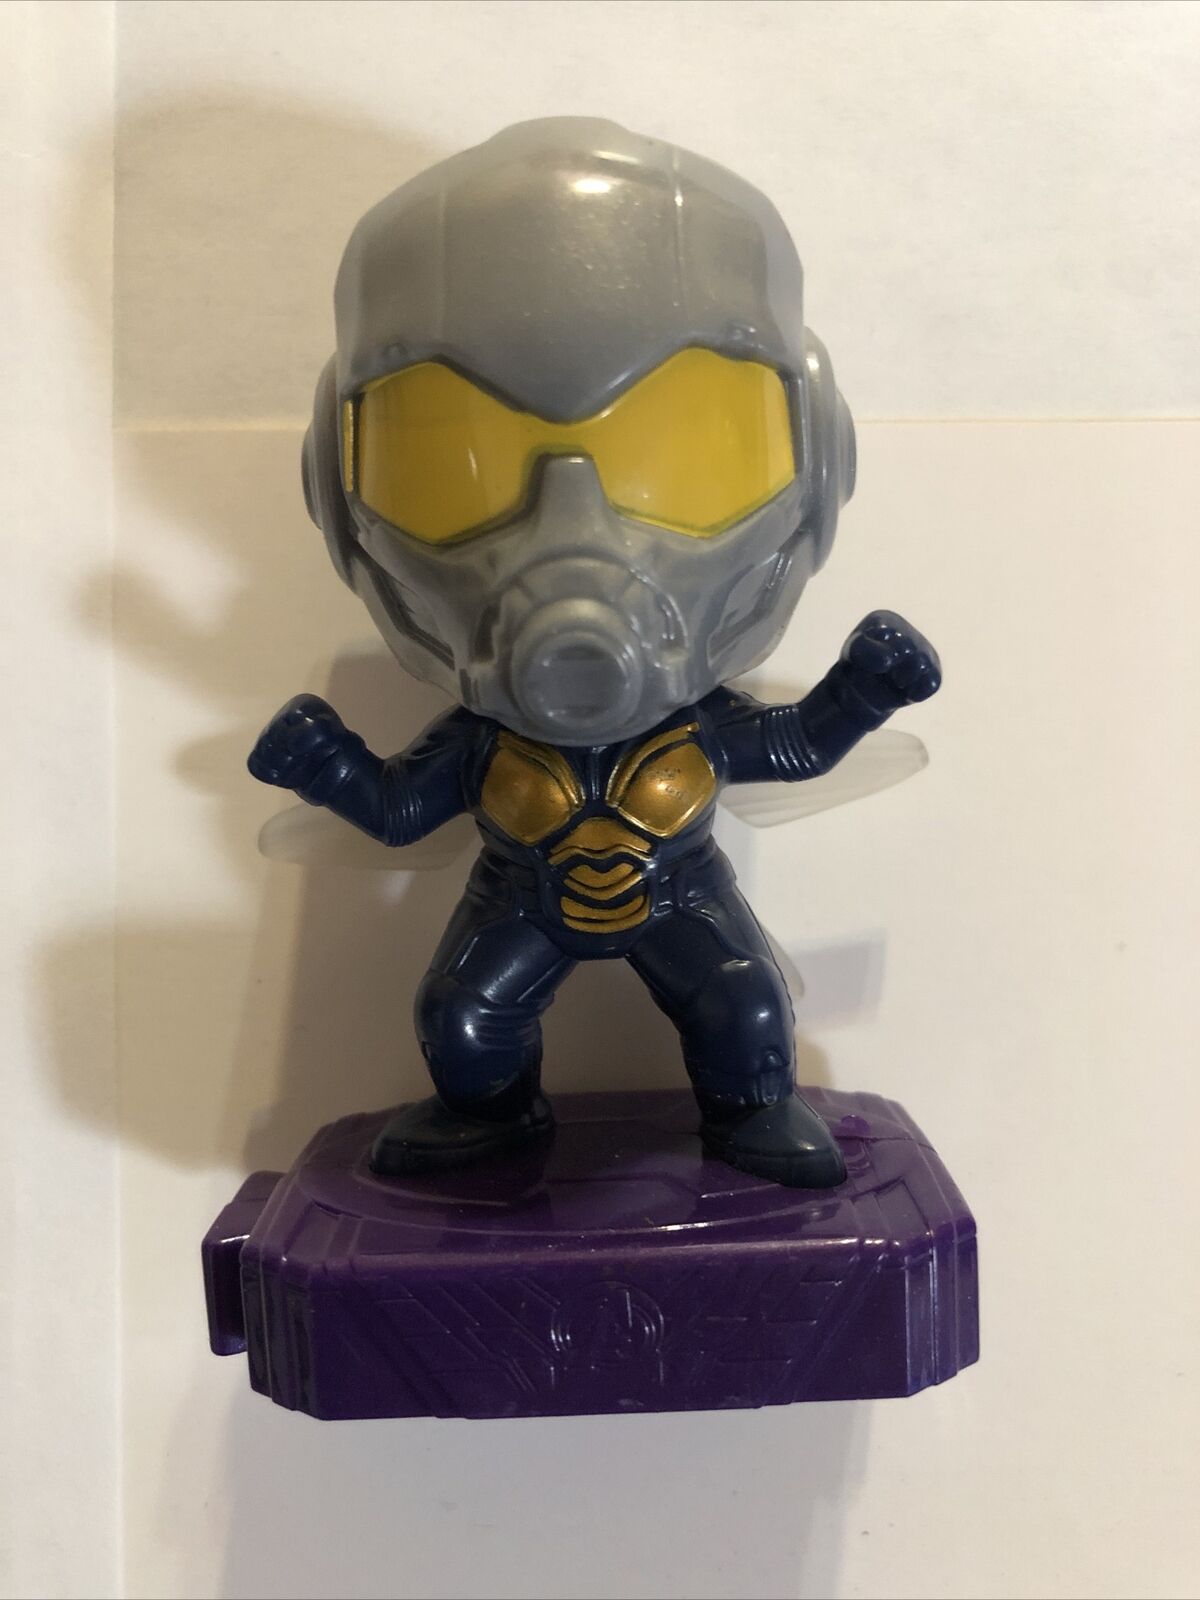 2020 McDonalds Happy Meal Toy Marvel Studios Heroes Ant-Man The